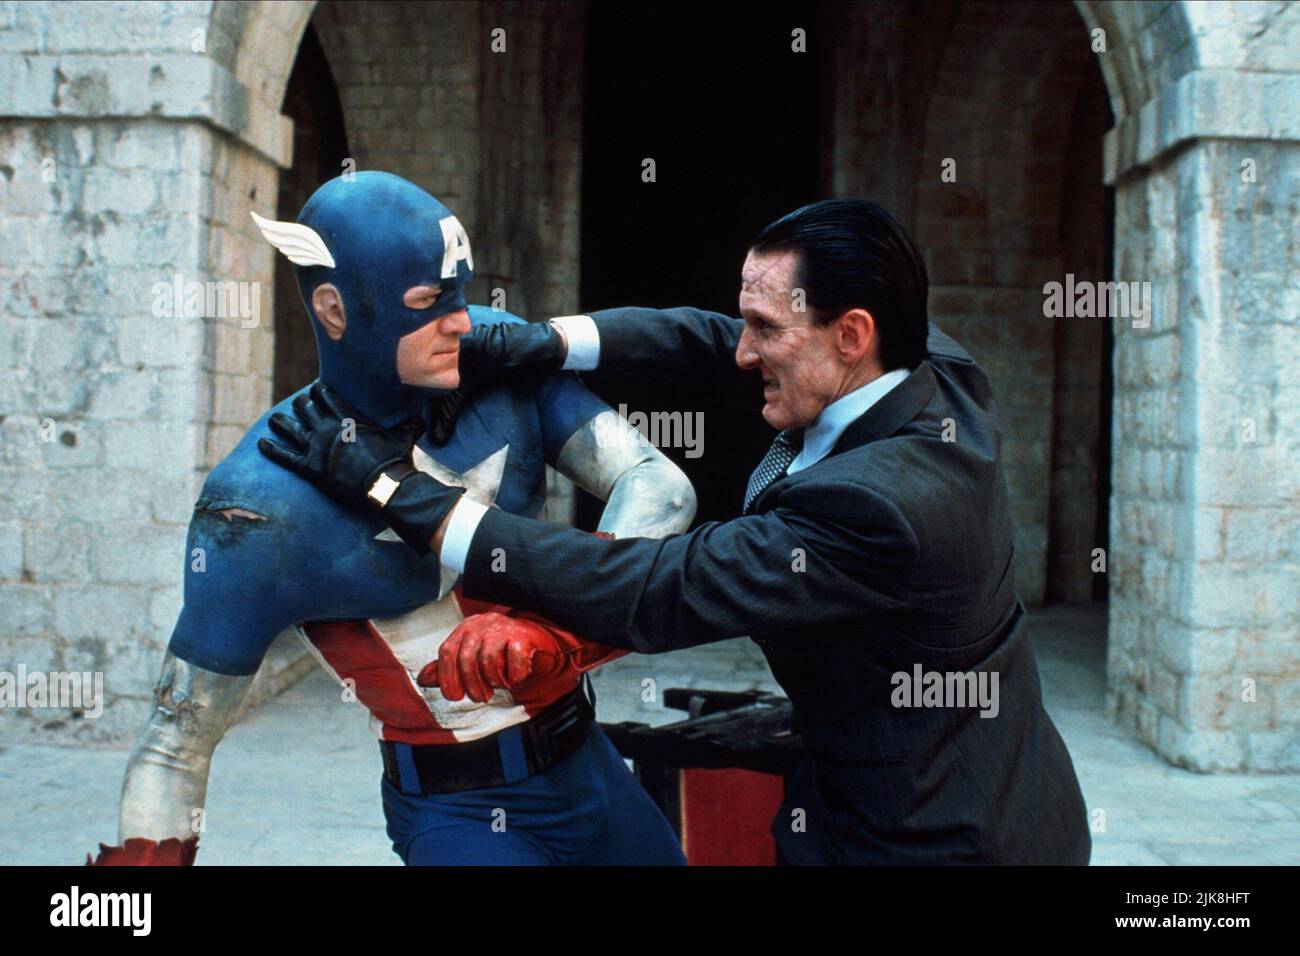 matt-salinger-film-captain-america-usayu-1990-director-albert-pyun-14-december-1990-warning-this-photograph-is-for-editorial-use-only-and-is-the-copyright-of-marvel-enterprises-andor-the-photographer-assigned-by-the-film-or-production-company-and-can-only-be-reproduced-by-publications-in-conjunction-with-the-promotion-of-the-above-film-a-mandatory-credit-to-marvel-enterprises-is-required-the-photographer-should-also-be-credited-when-known-no-commercial-use-can-be-granted-without-written-authority-from-the-film-company-2JK8HFT.jpg